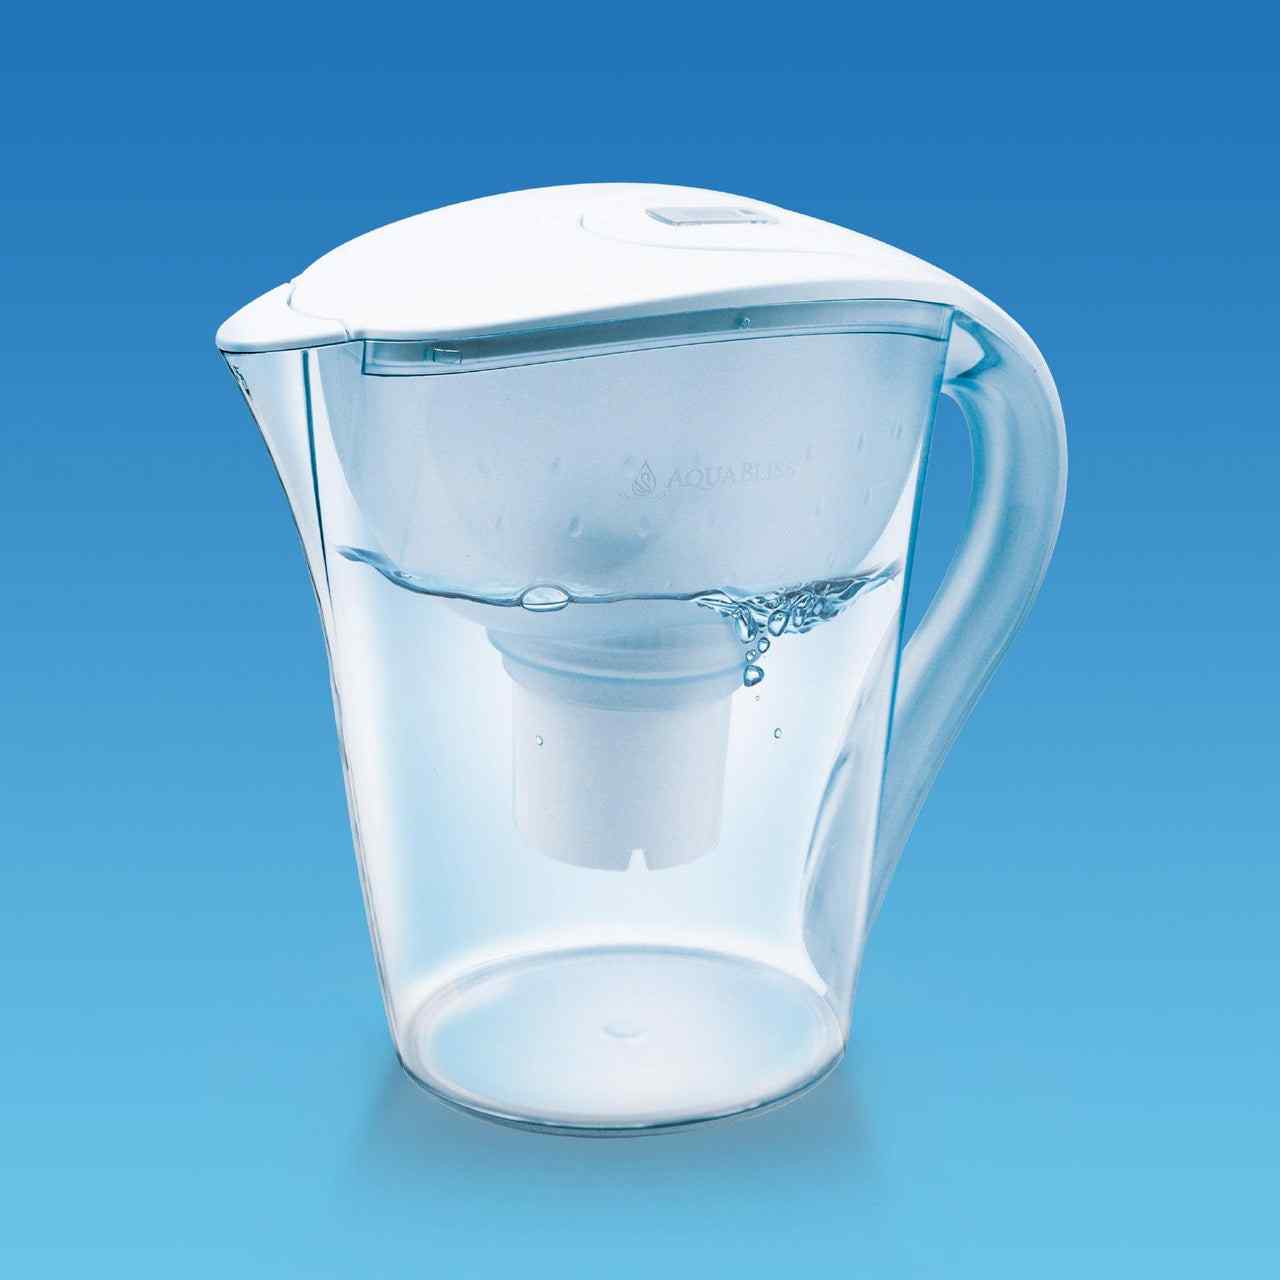 AquaBliss Longest Lasting 10-Cup Water Pitcher – Filter 2 Times More